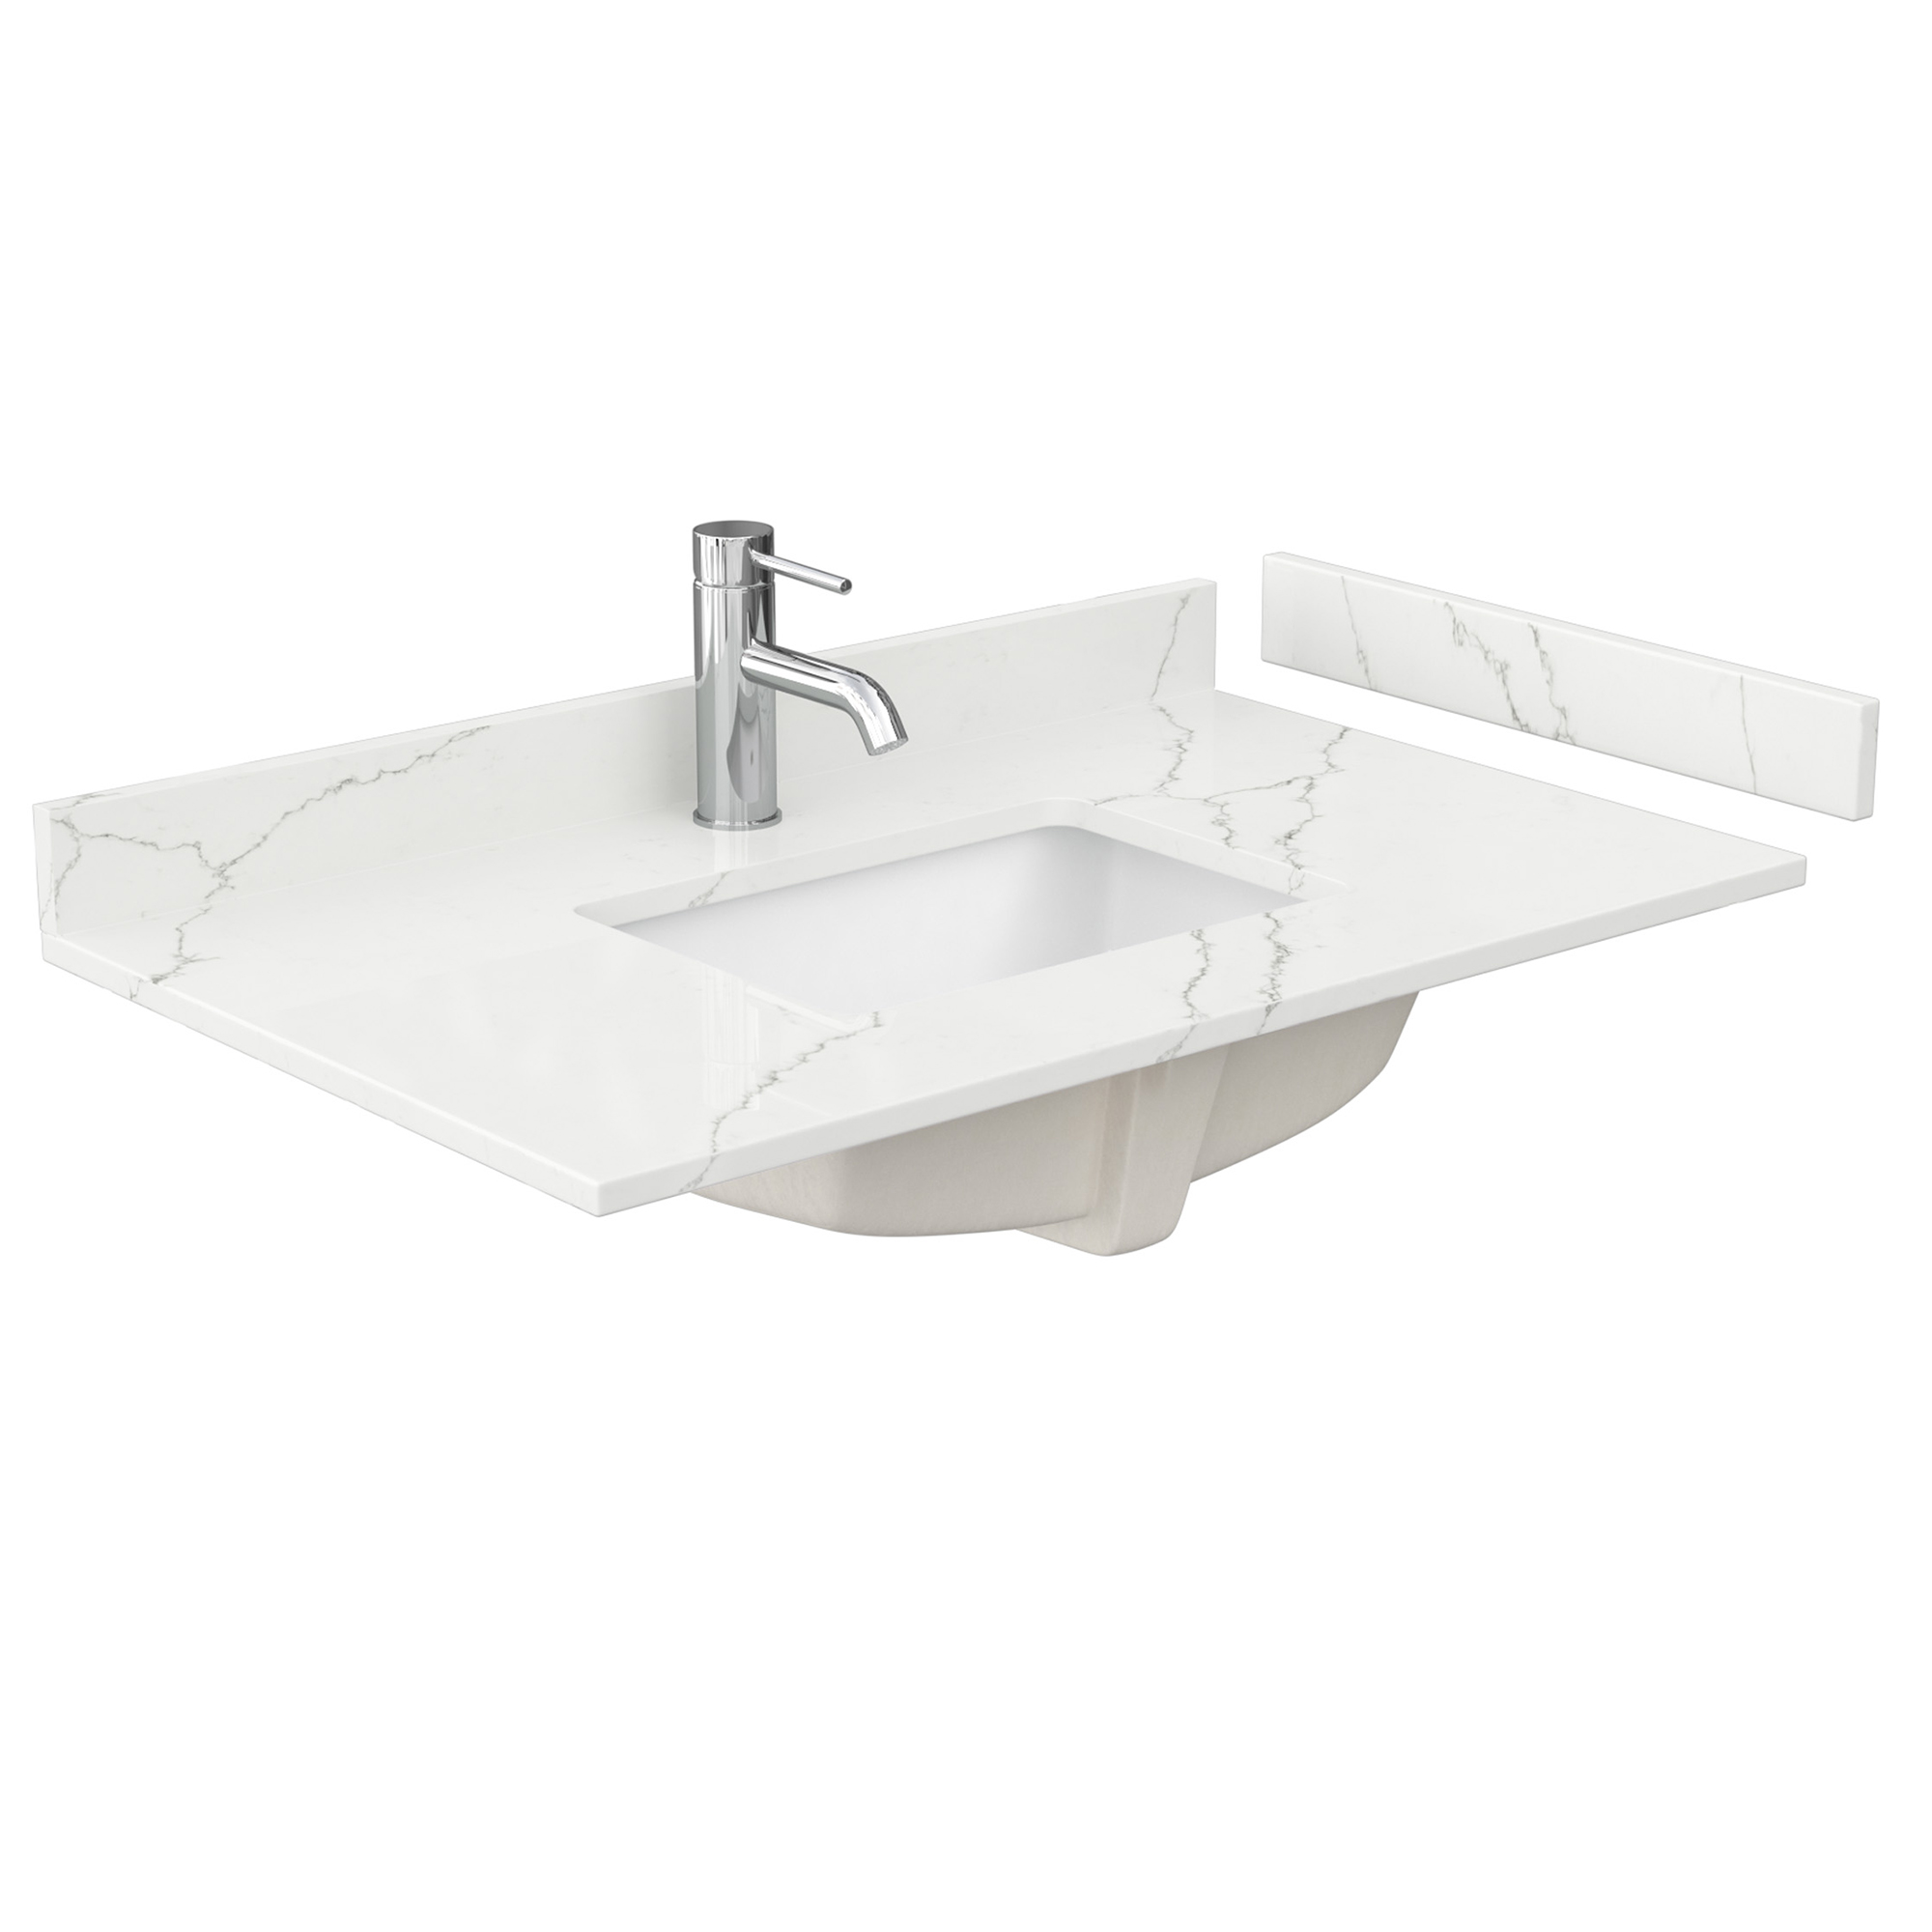 36" Single Countertop - Giotto Quartz (8066) with Undermount Square Sink (1-Hole) - Includes Backsplash and Sidesplash WCFQC136STOPUNSGT